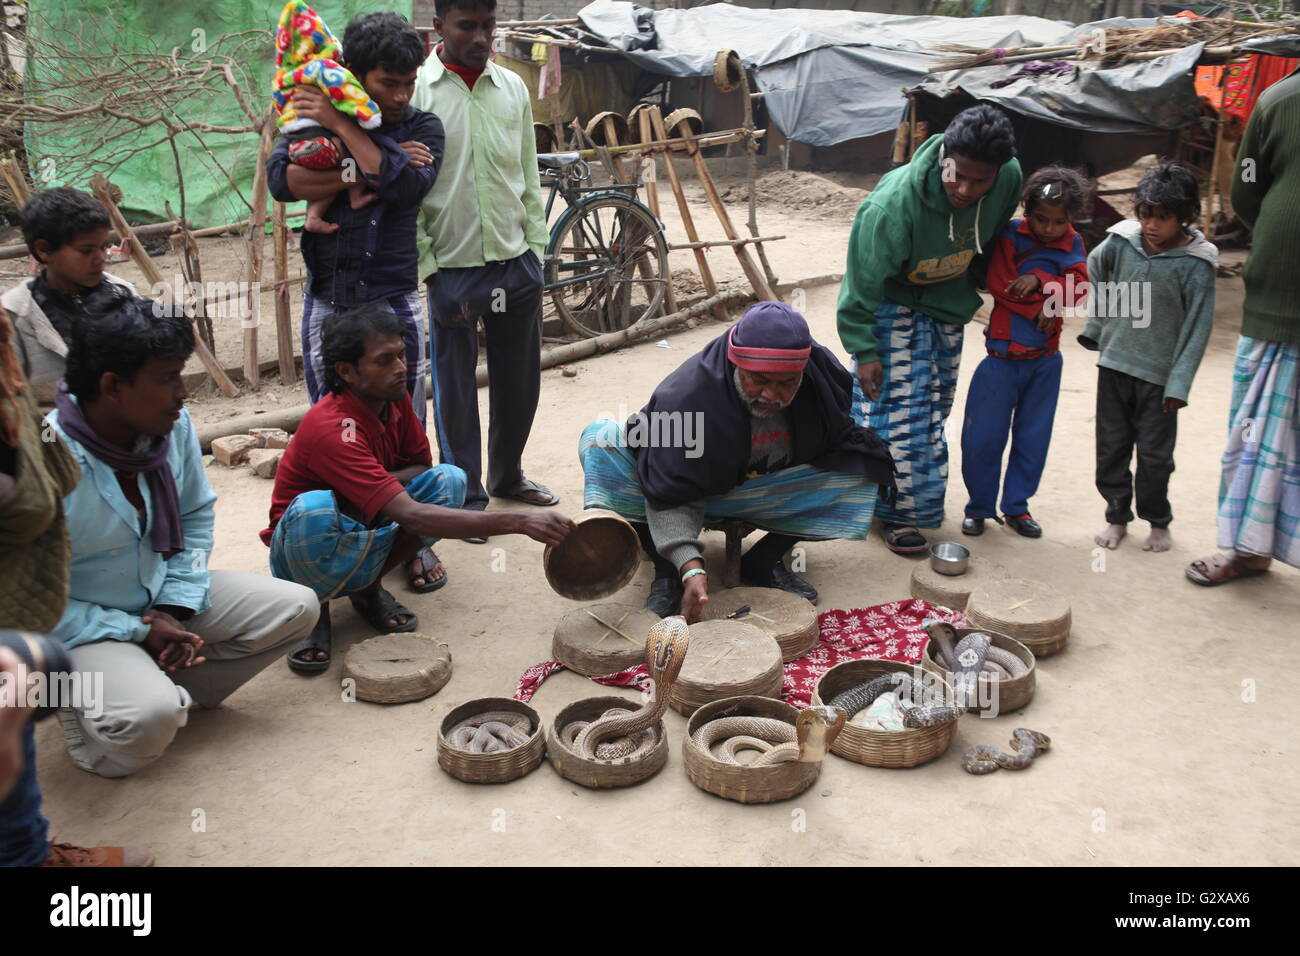 deadly snakes coming out of the baskets during a display by snake charmers in west bengal Stock Photo